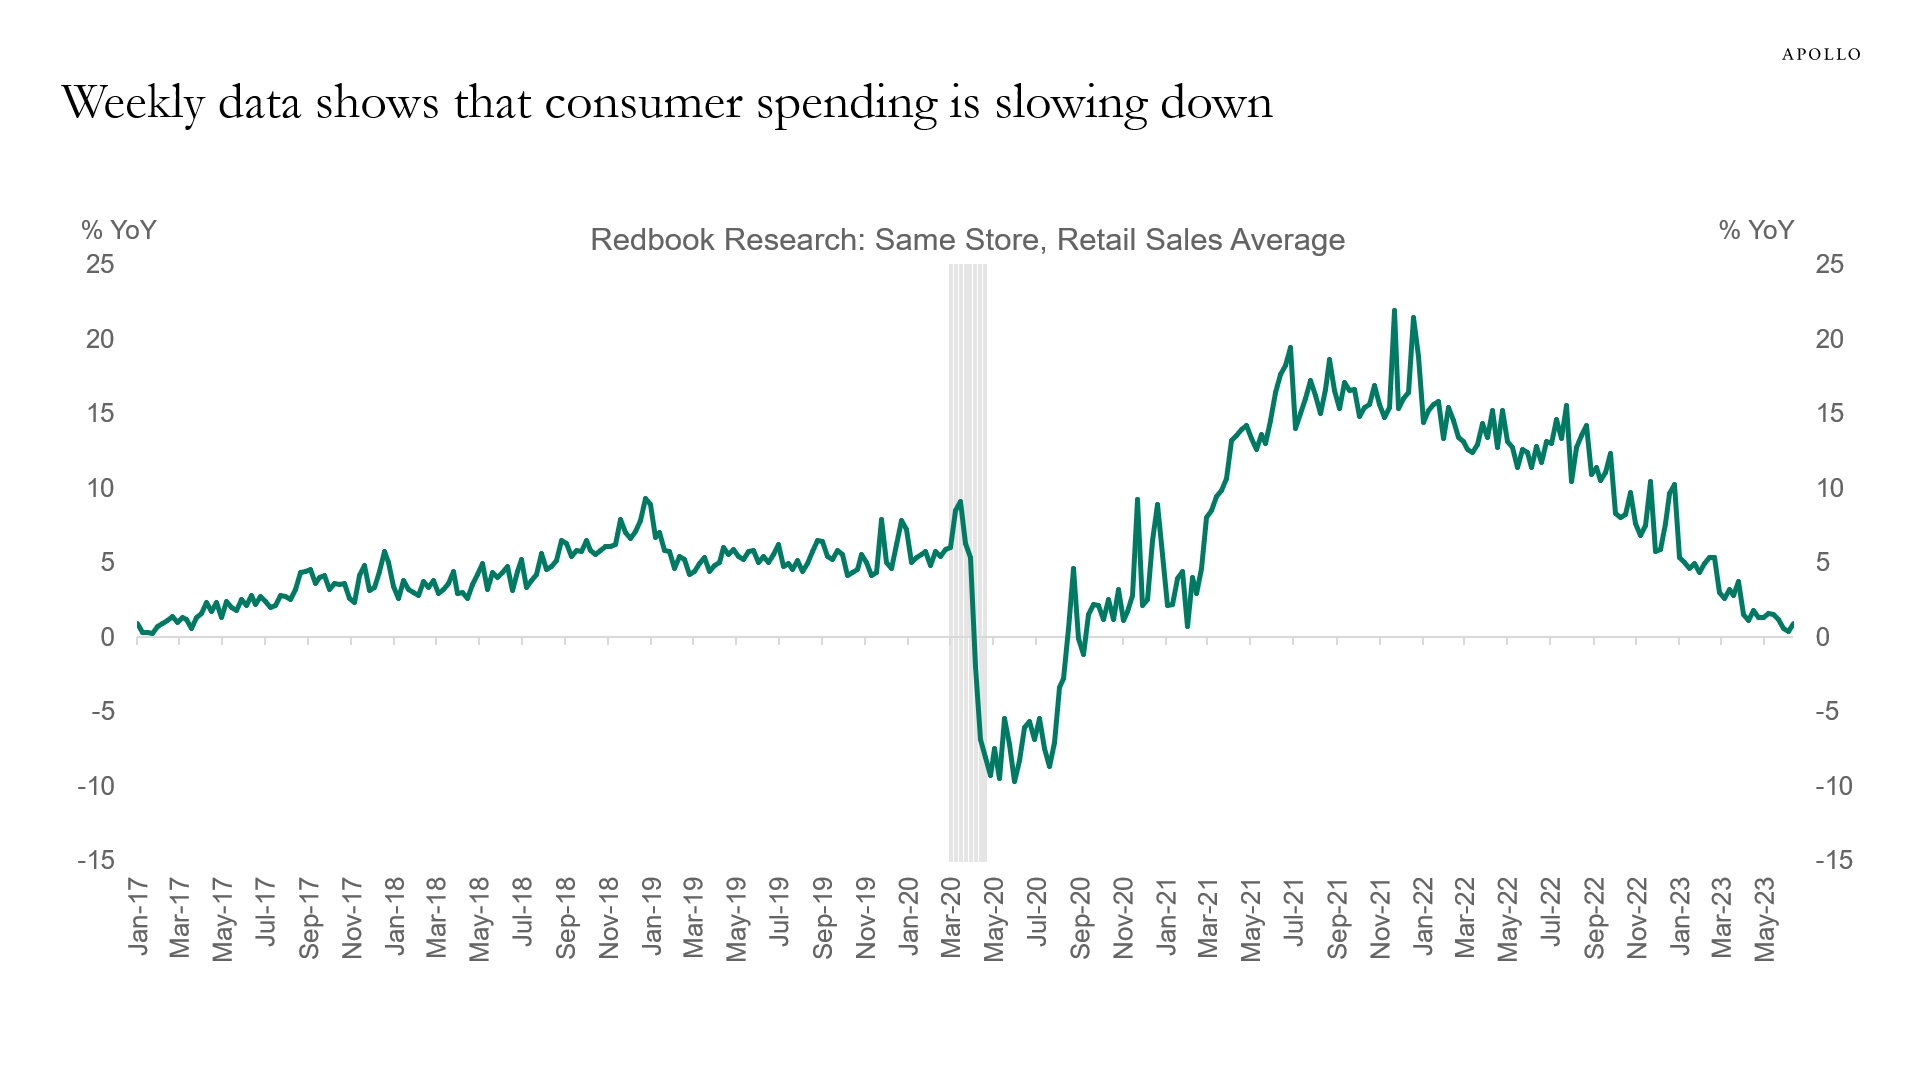 Retail sales are slowing.